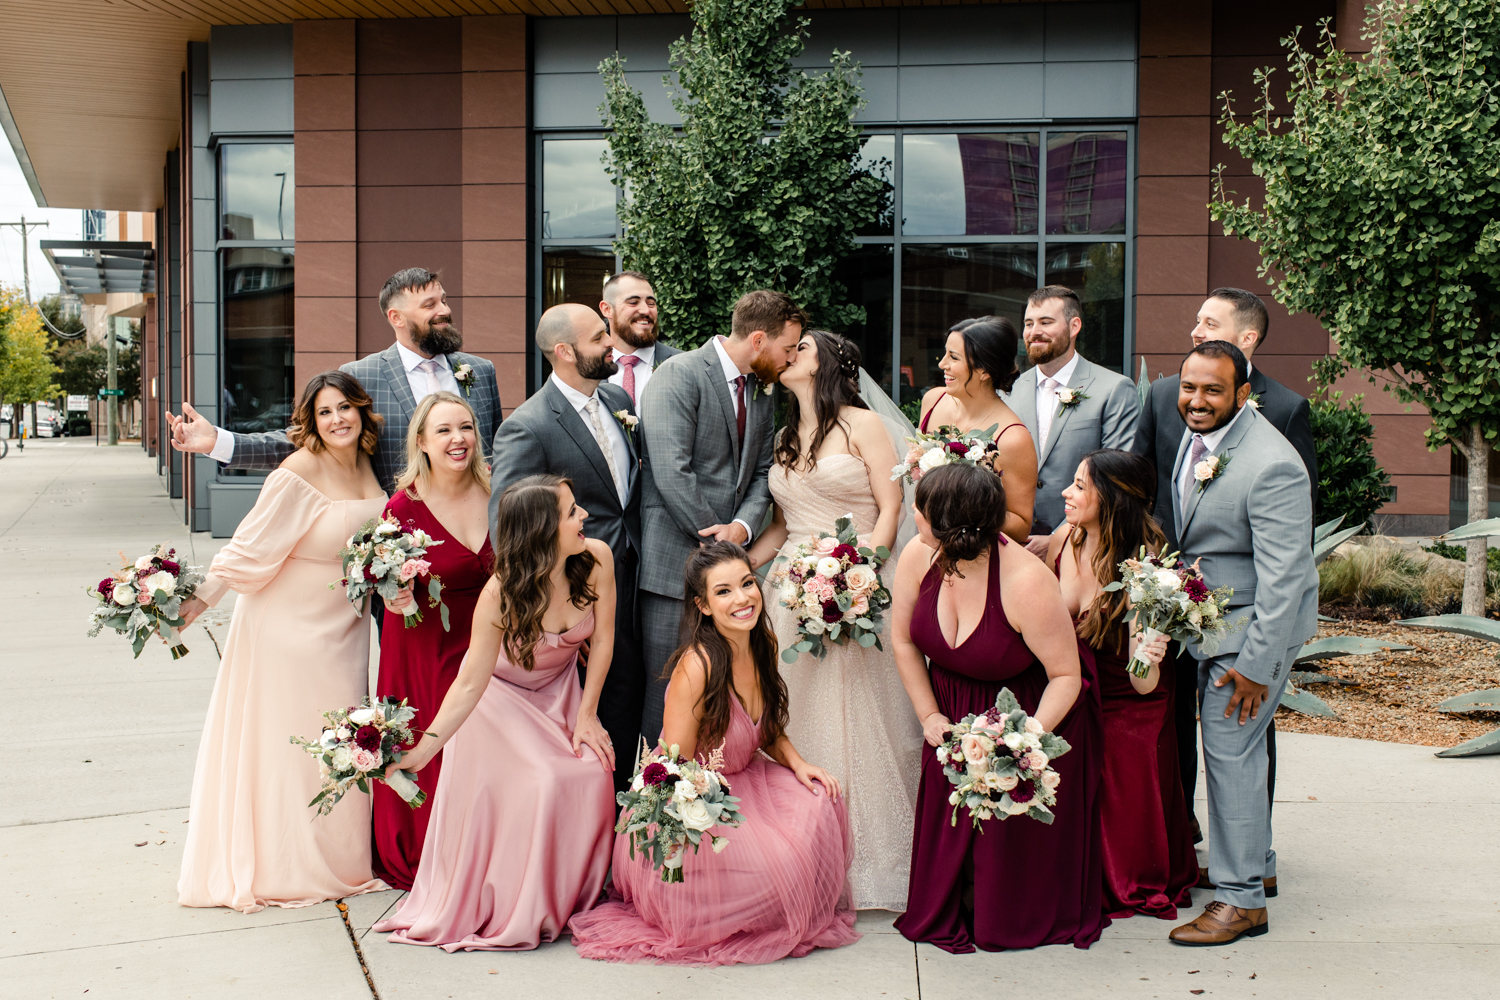 Groomsmen in grey suits and bridesmaids in pink dresses cheer on the bride in groom at the Collector's Room Charlotte wedding venue. Photographed by Charlotte wedding photographer.